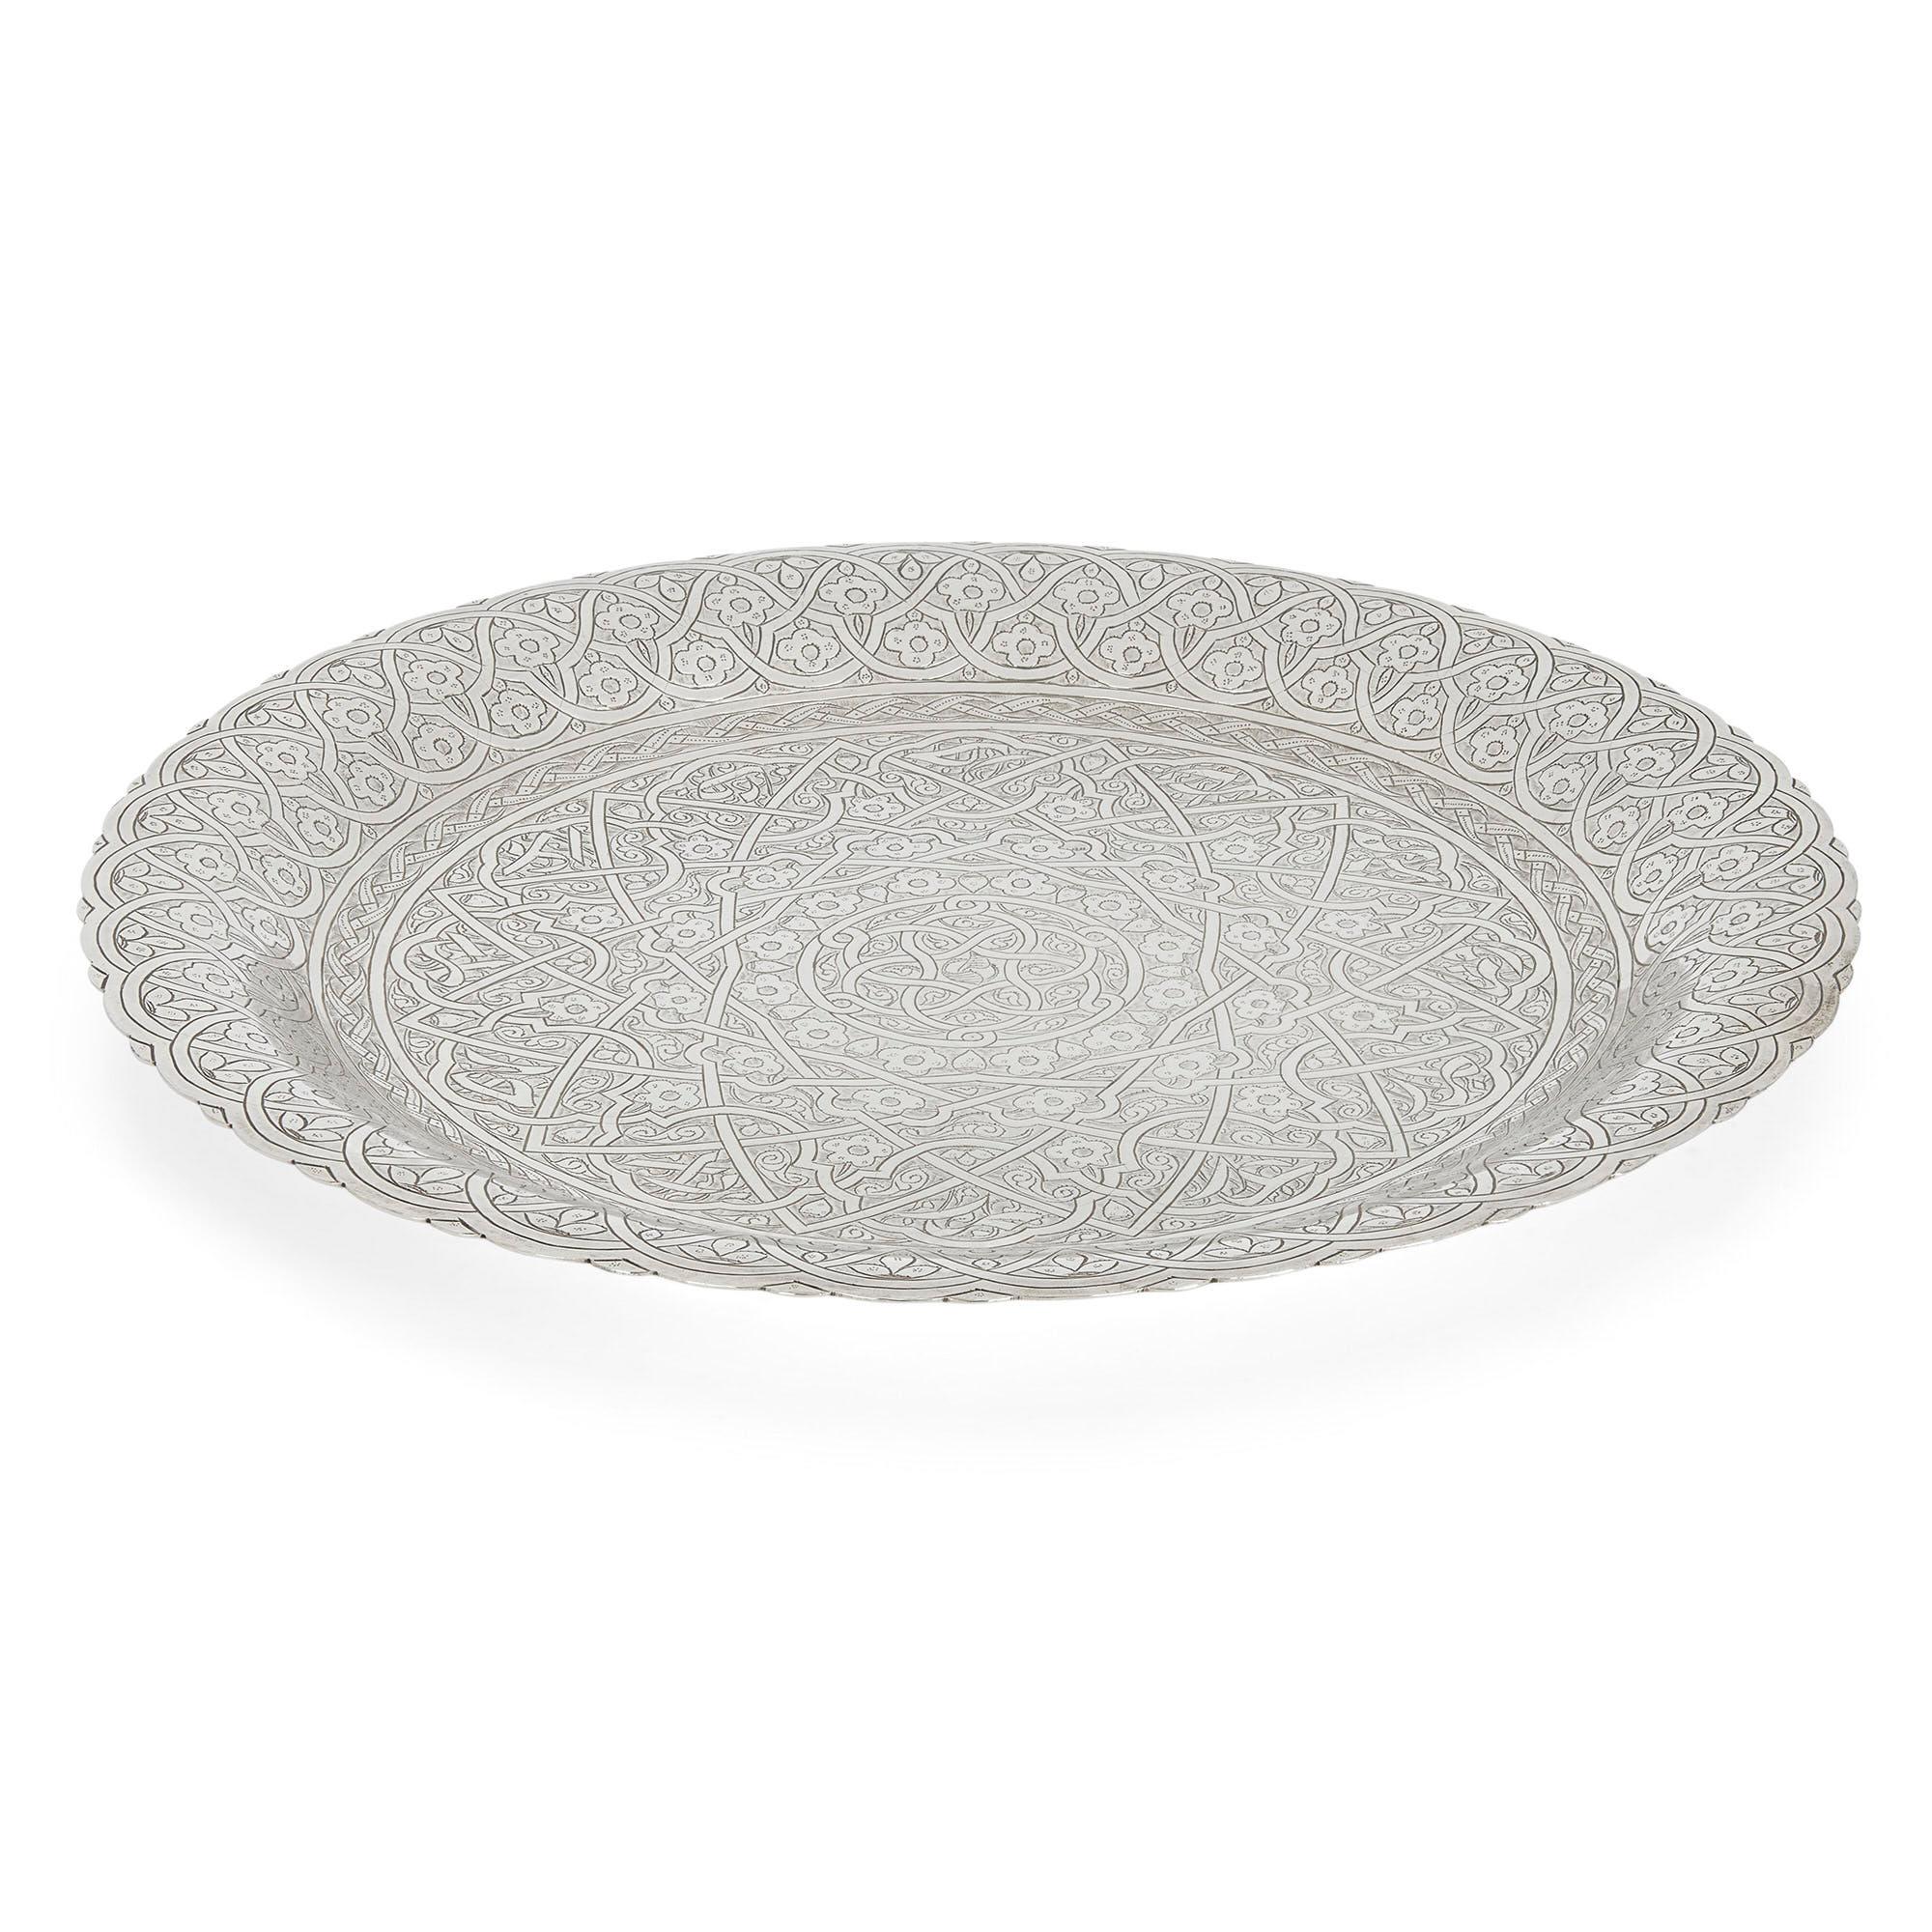 Egyptian engraved silver dish
Egyptian, 1959-1961
Measures: Height 2cm, diameter 28.5cm

This fine, elegant bowl is wrought from silver, and features floral and geometric engravings all over, as well as a stepped rim and petal edge.

The